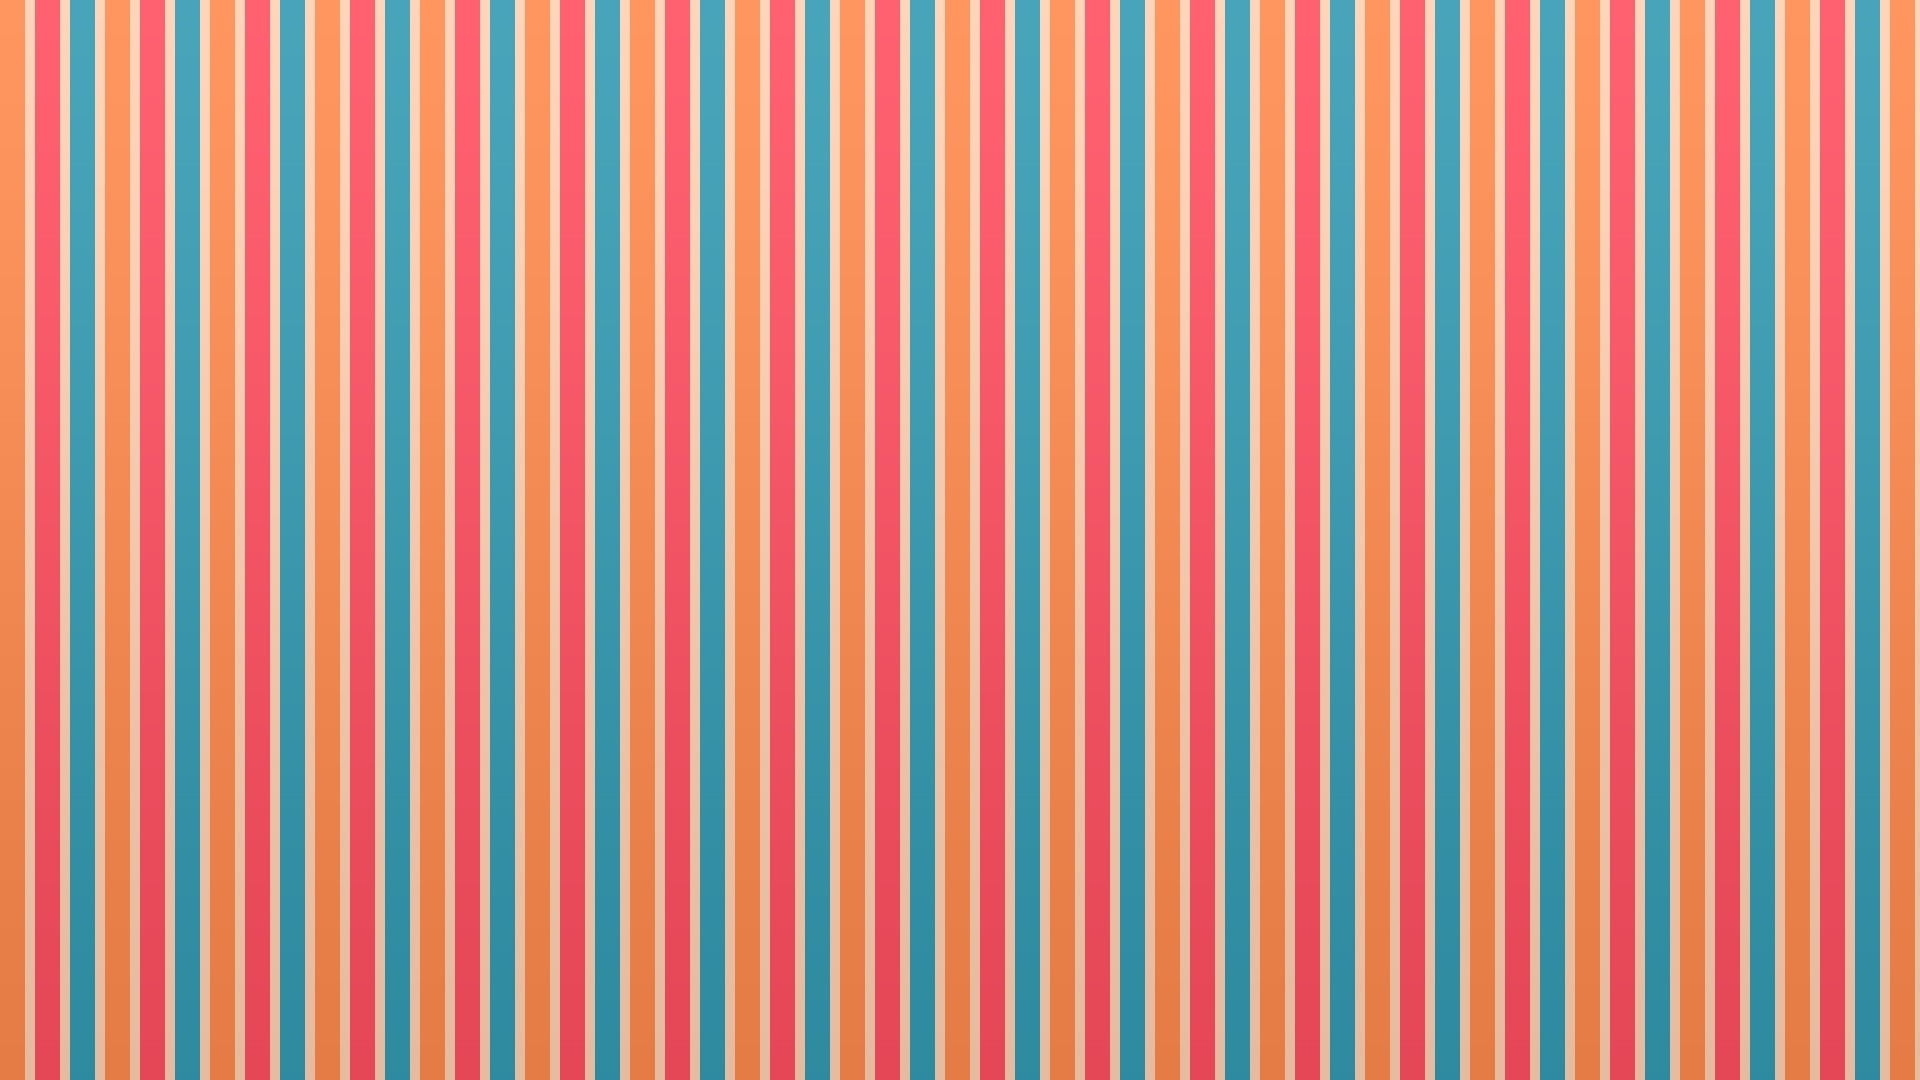 pink, orange and blue striped surface